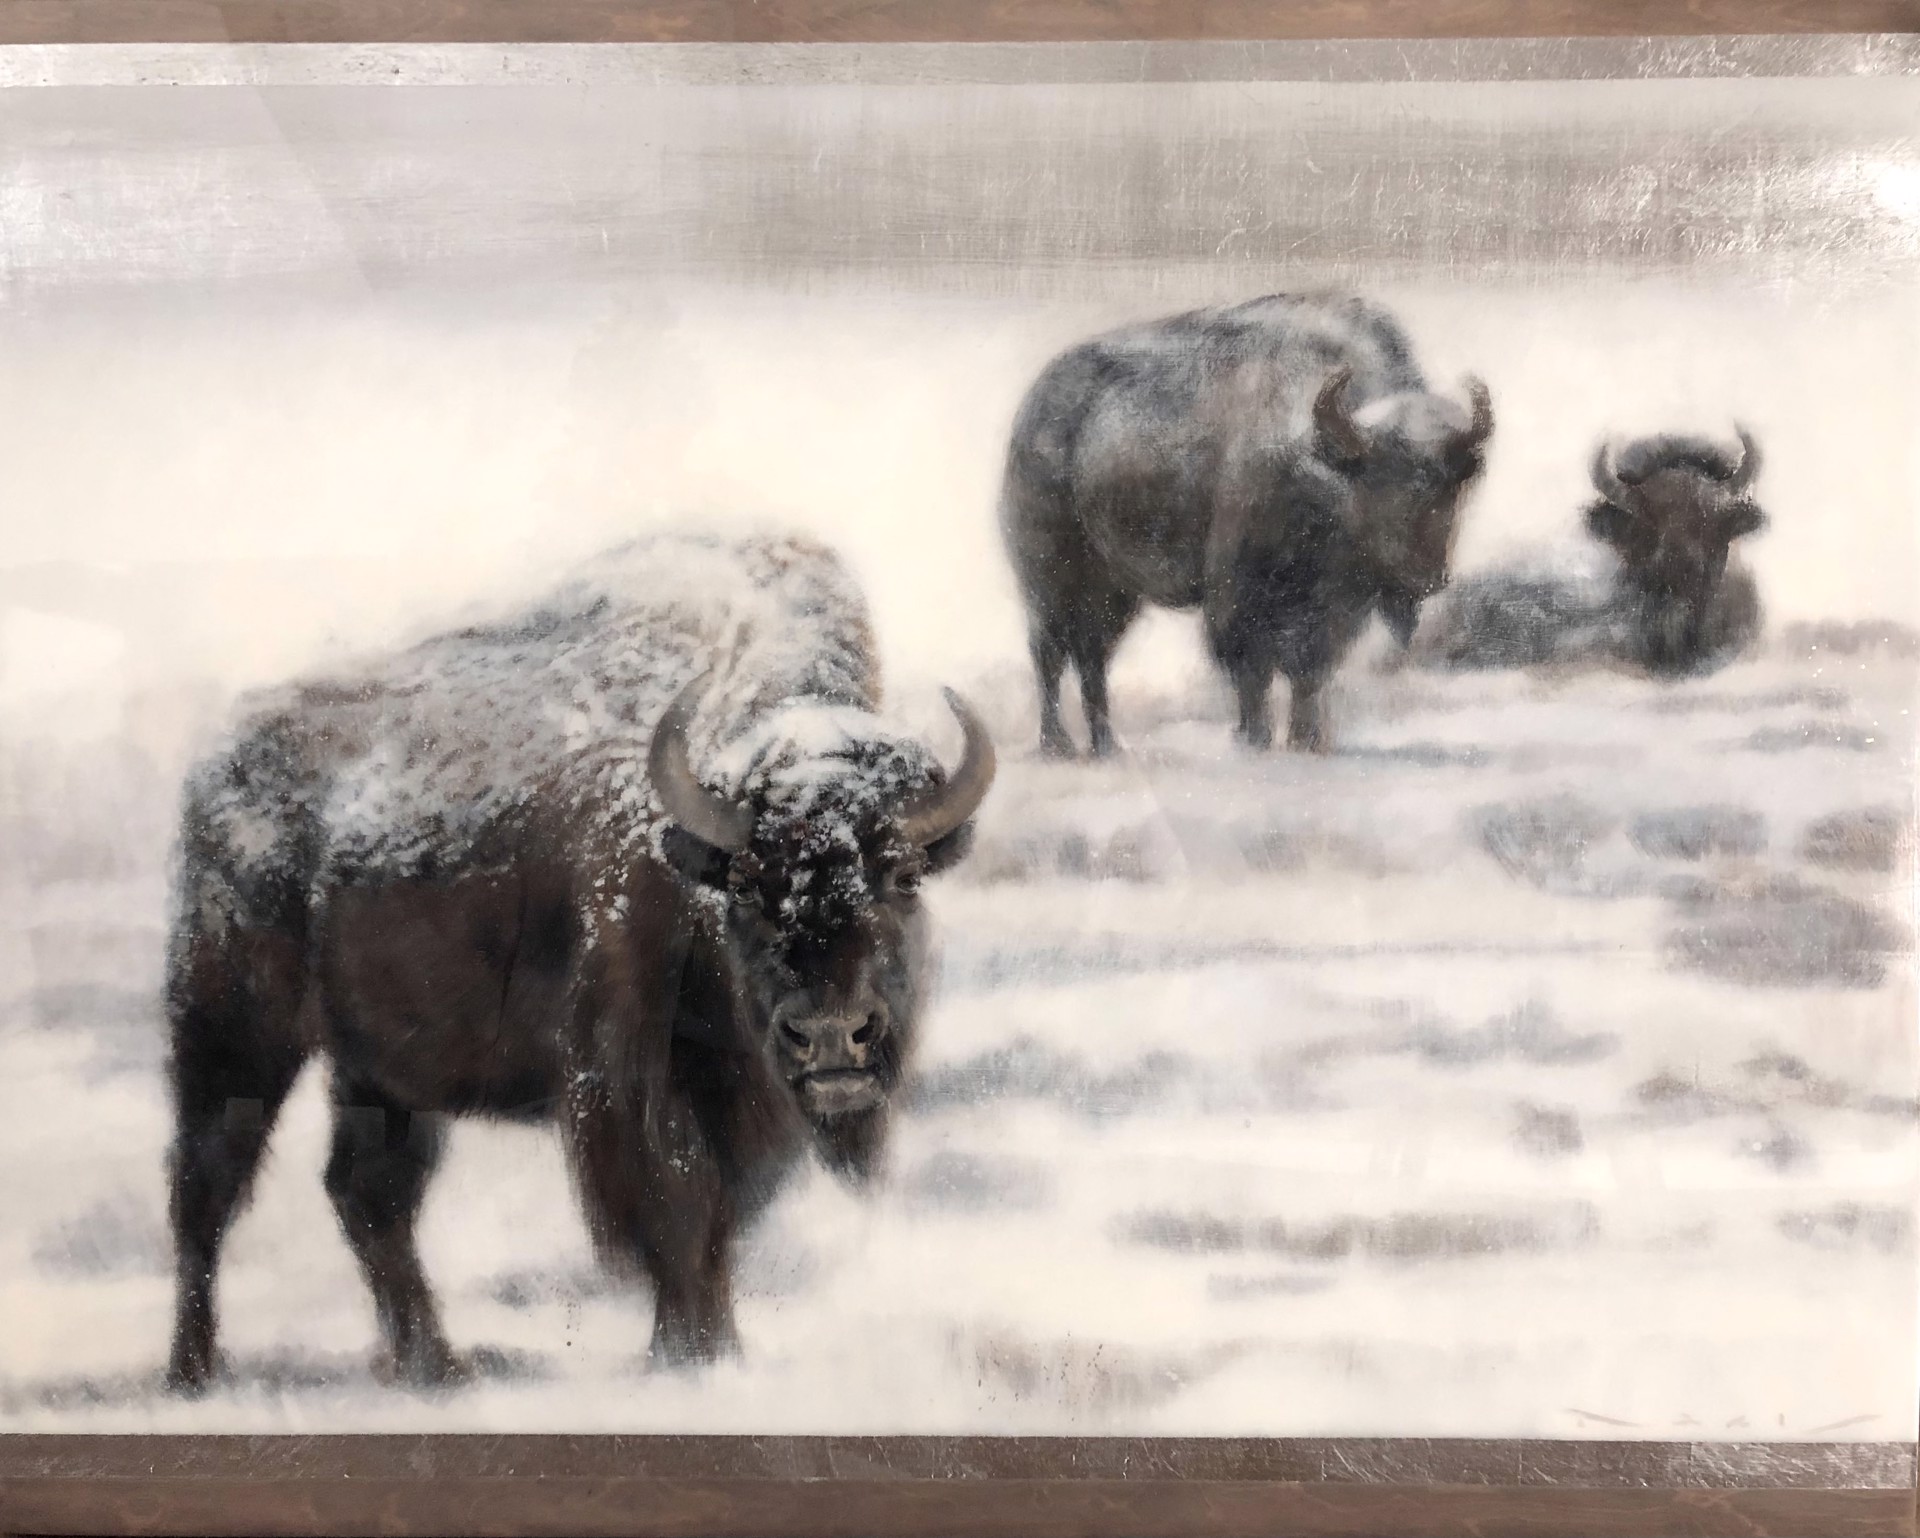 Original Artwork Featuring Bison And Contemporary Panel Background